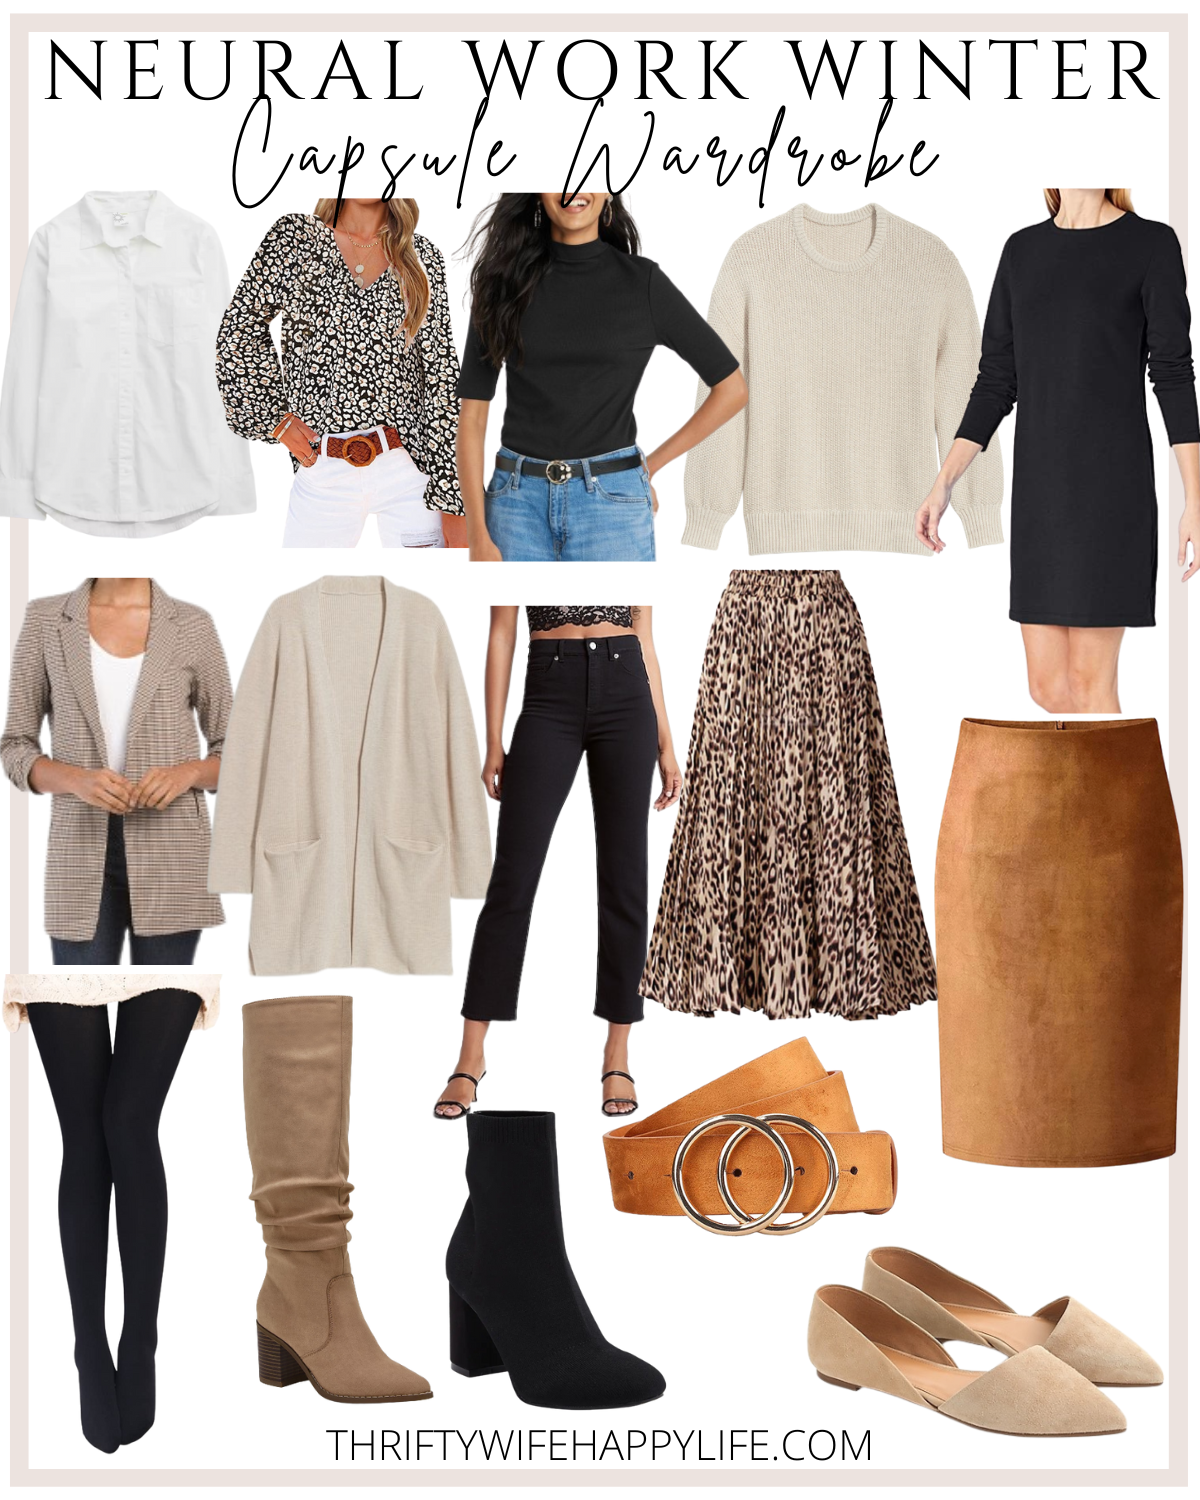 Neutral Work Winter Capsule Wardrobe: 15 Pieces, 20 Outfits - Thrifty Wife  Happy Life